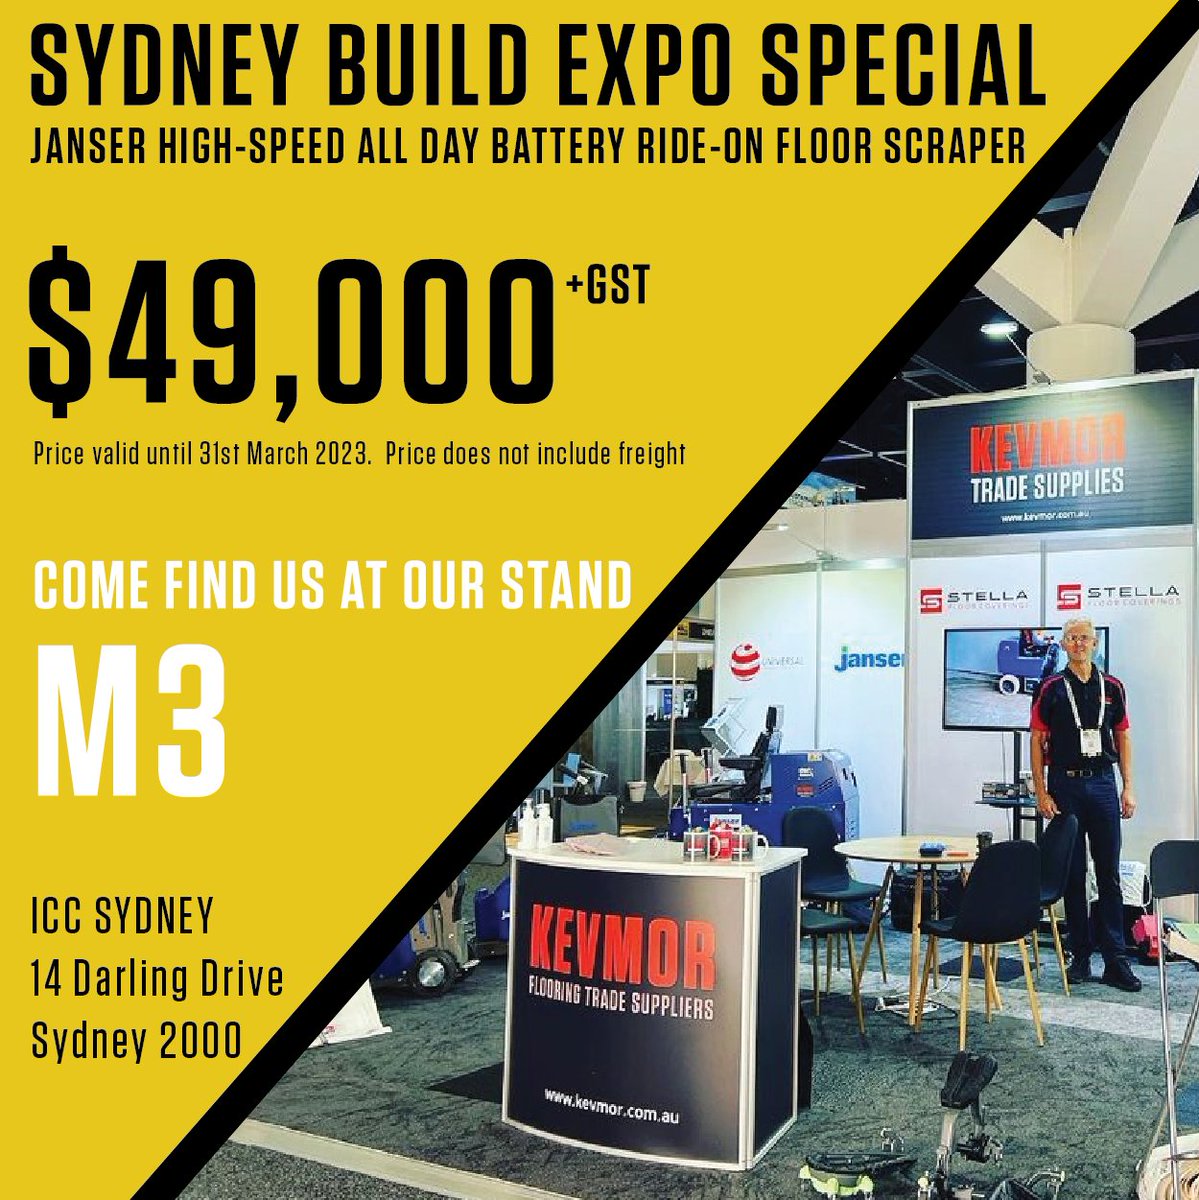 Come see us this #TOOLTUESDAY at Sydney Build Expo

Janser All Day Battery Ride-On Scraper Expo Special $49,000+gst

High-Speed All Day Battery Ride-On Floor Scraper

kevmor.com.au/floor-scrapers…

#sydneybuild  #expo #kevmoraus #jansergmbh #rideon #floorscraper #alldaybattery